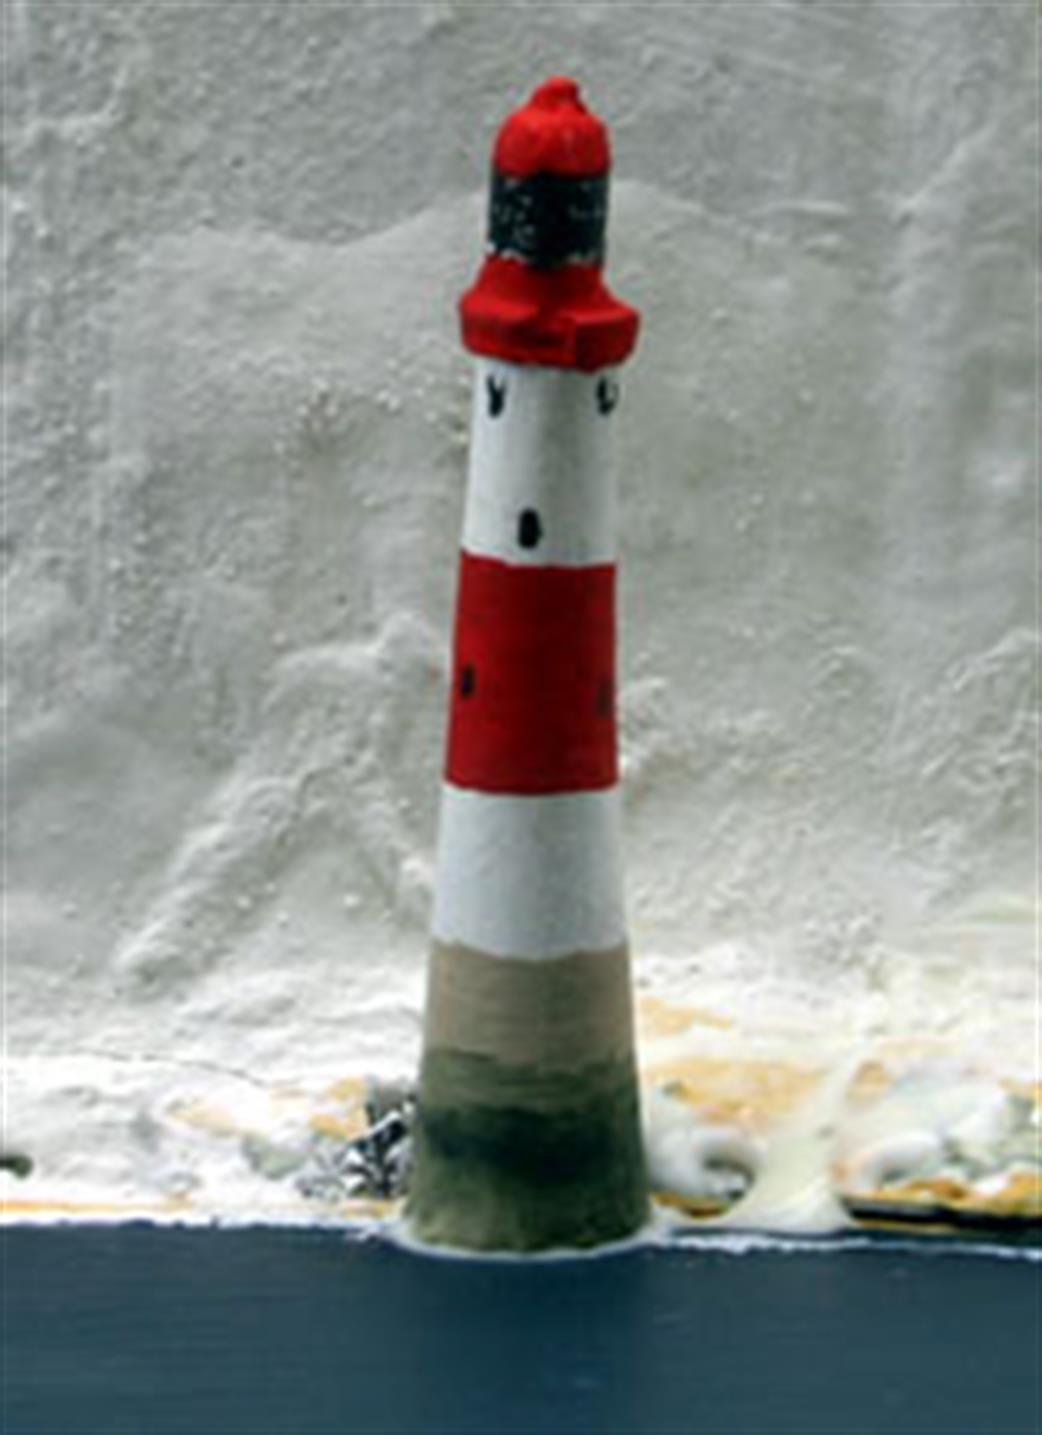 Coastlines CL-L02 Beachy Head Lighthouse, as famous as the Seven Sisters Cliffs themselves 1/1250